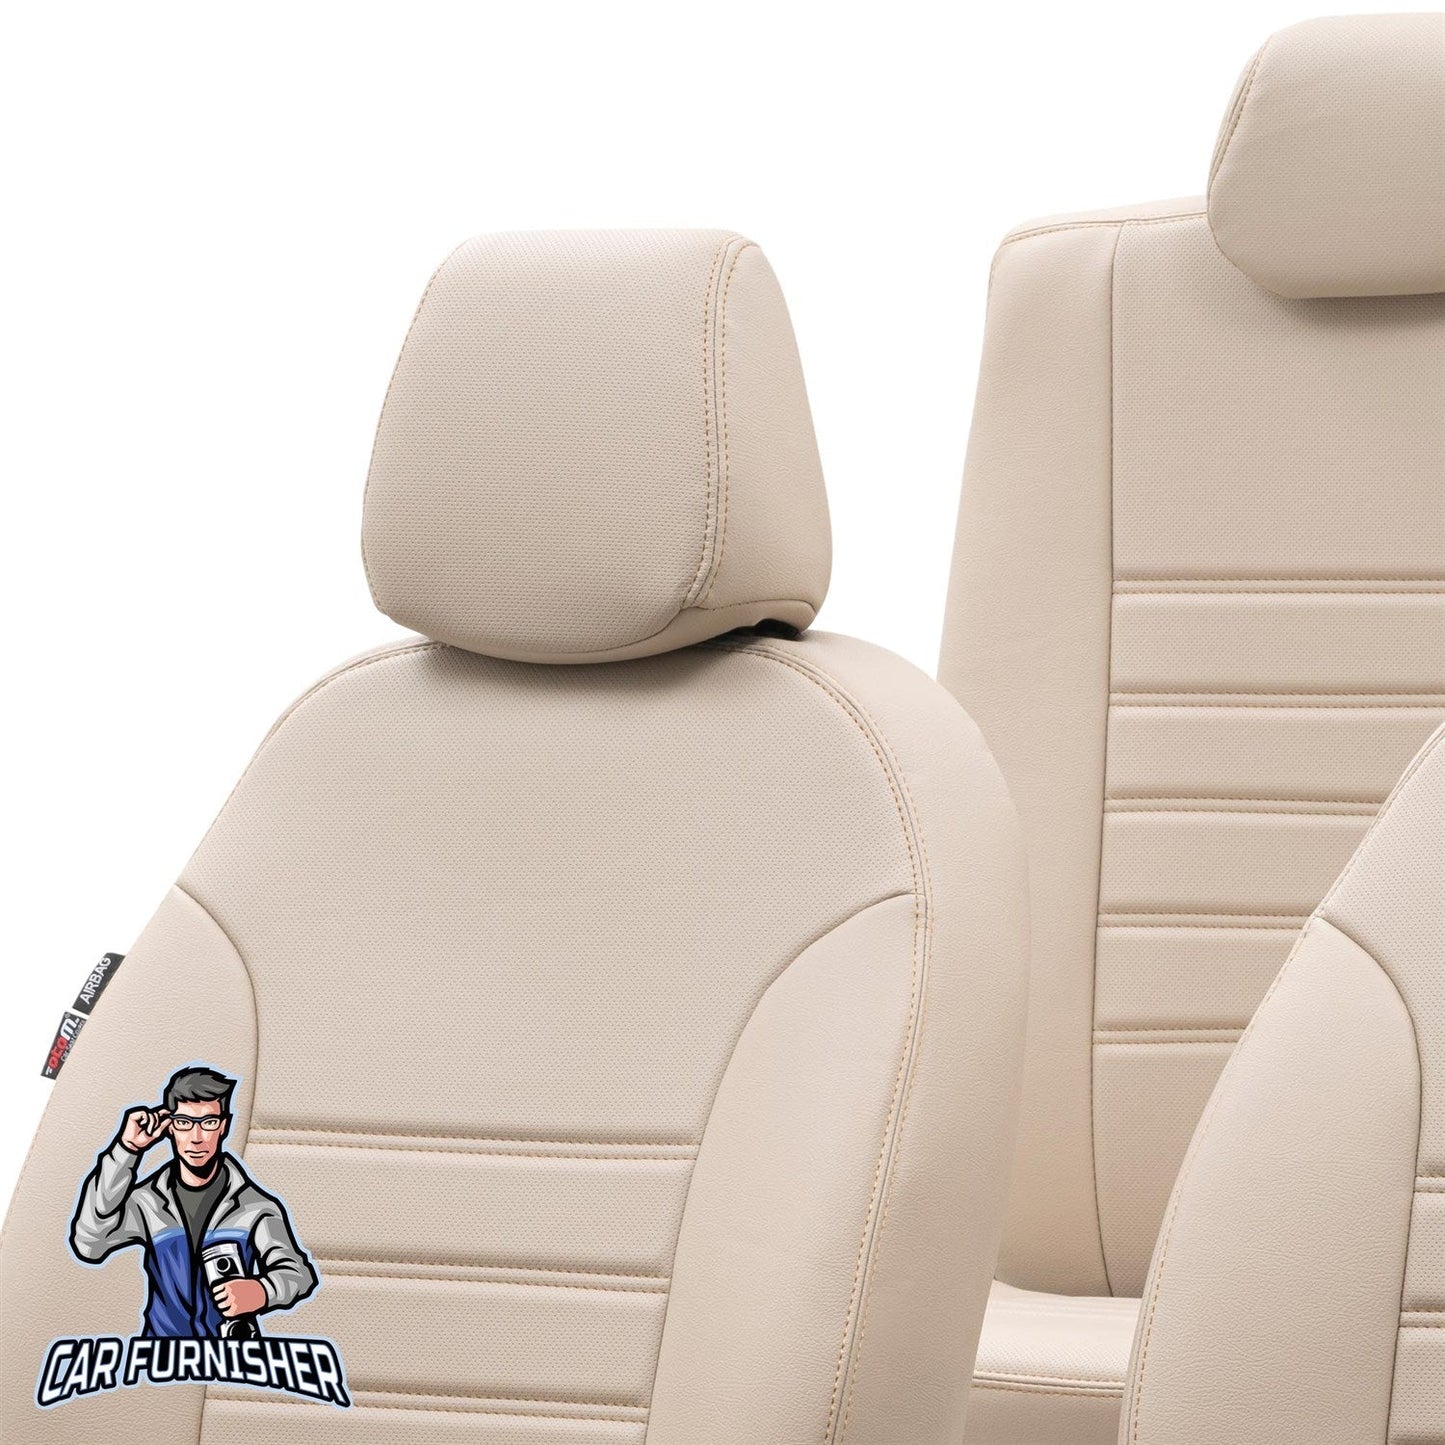 Peugeot 407 Seat Covers Istanbul Leather Design Beige Leather